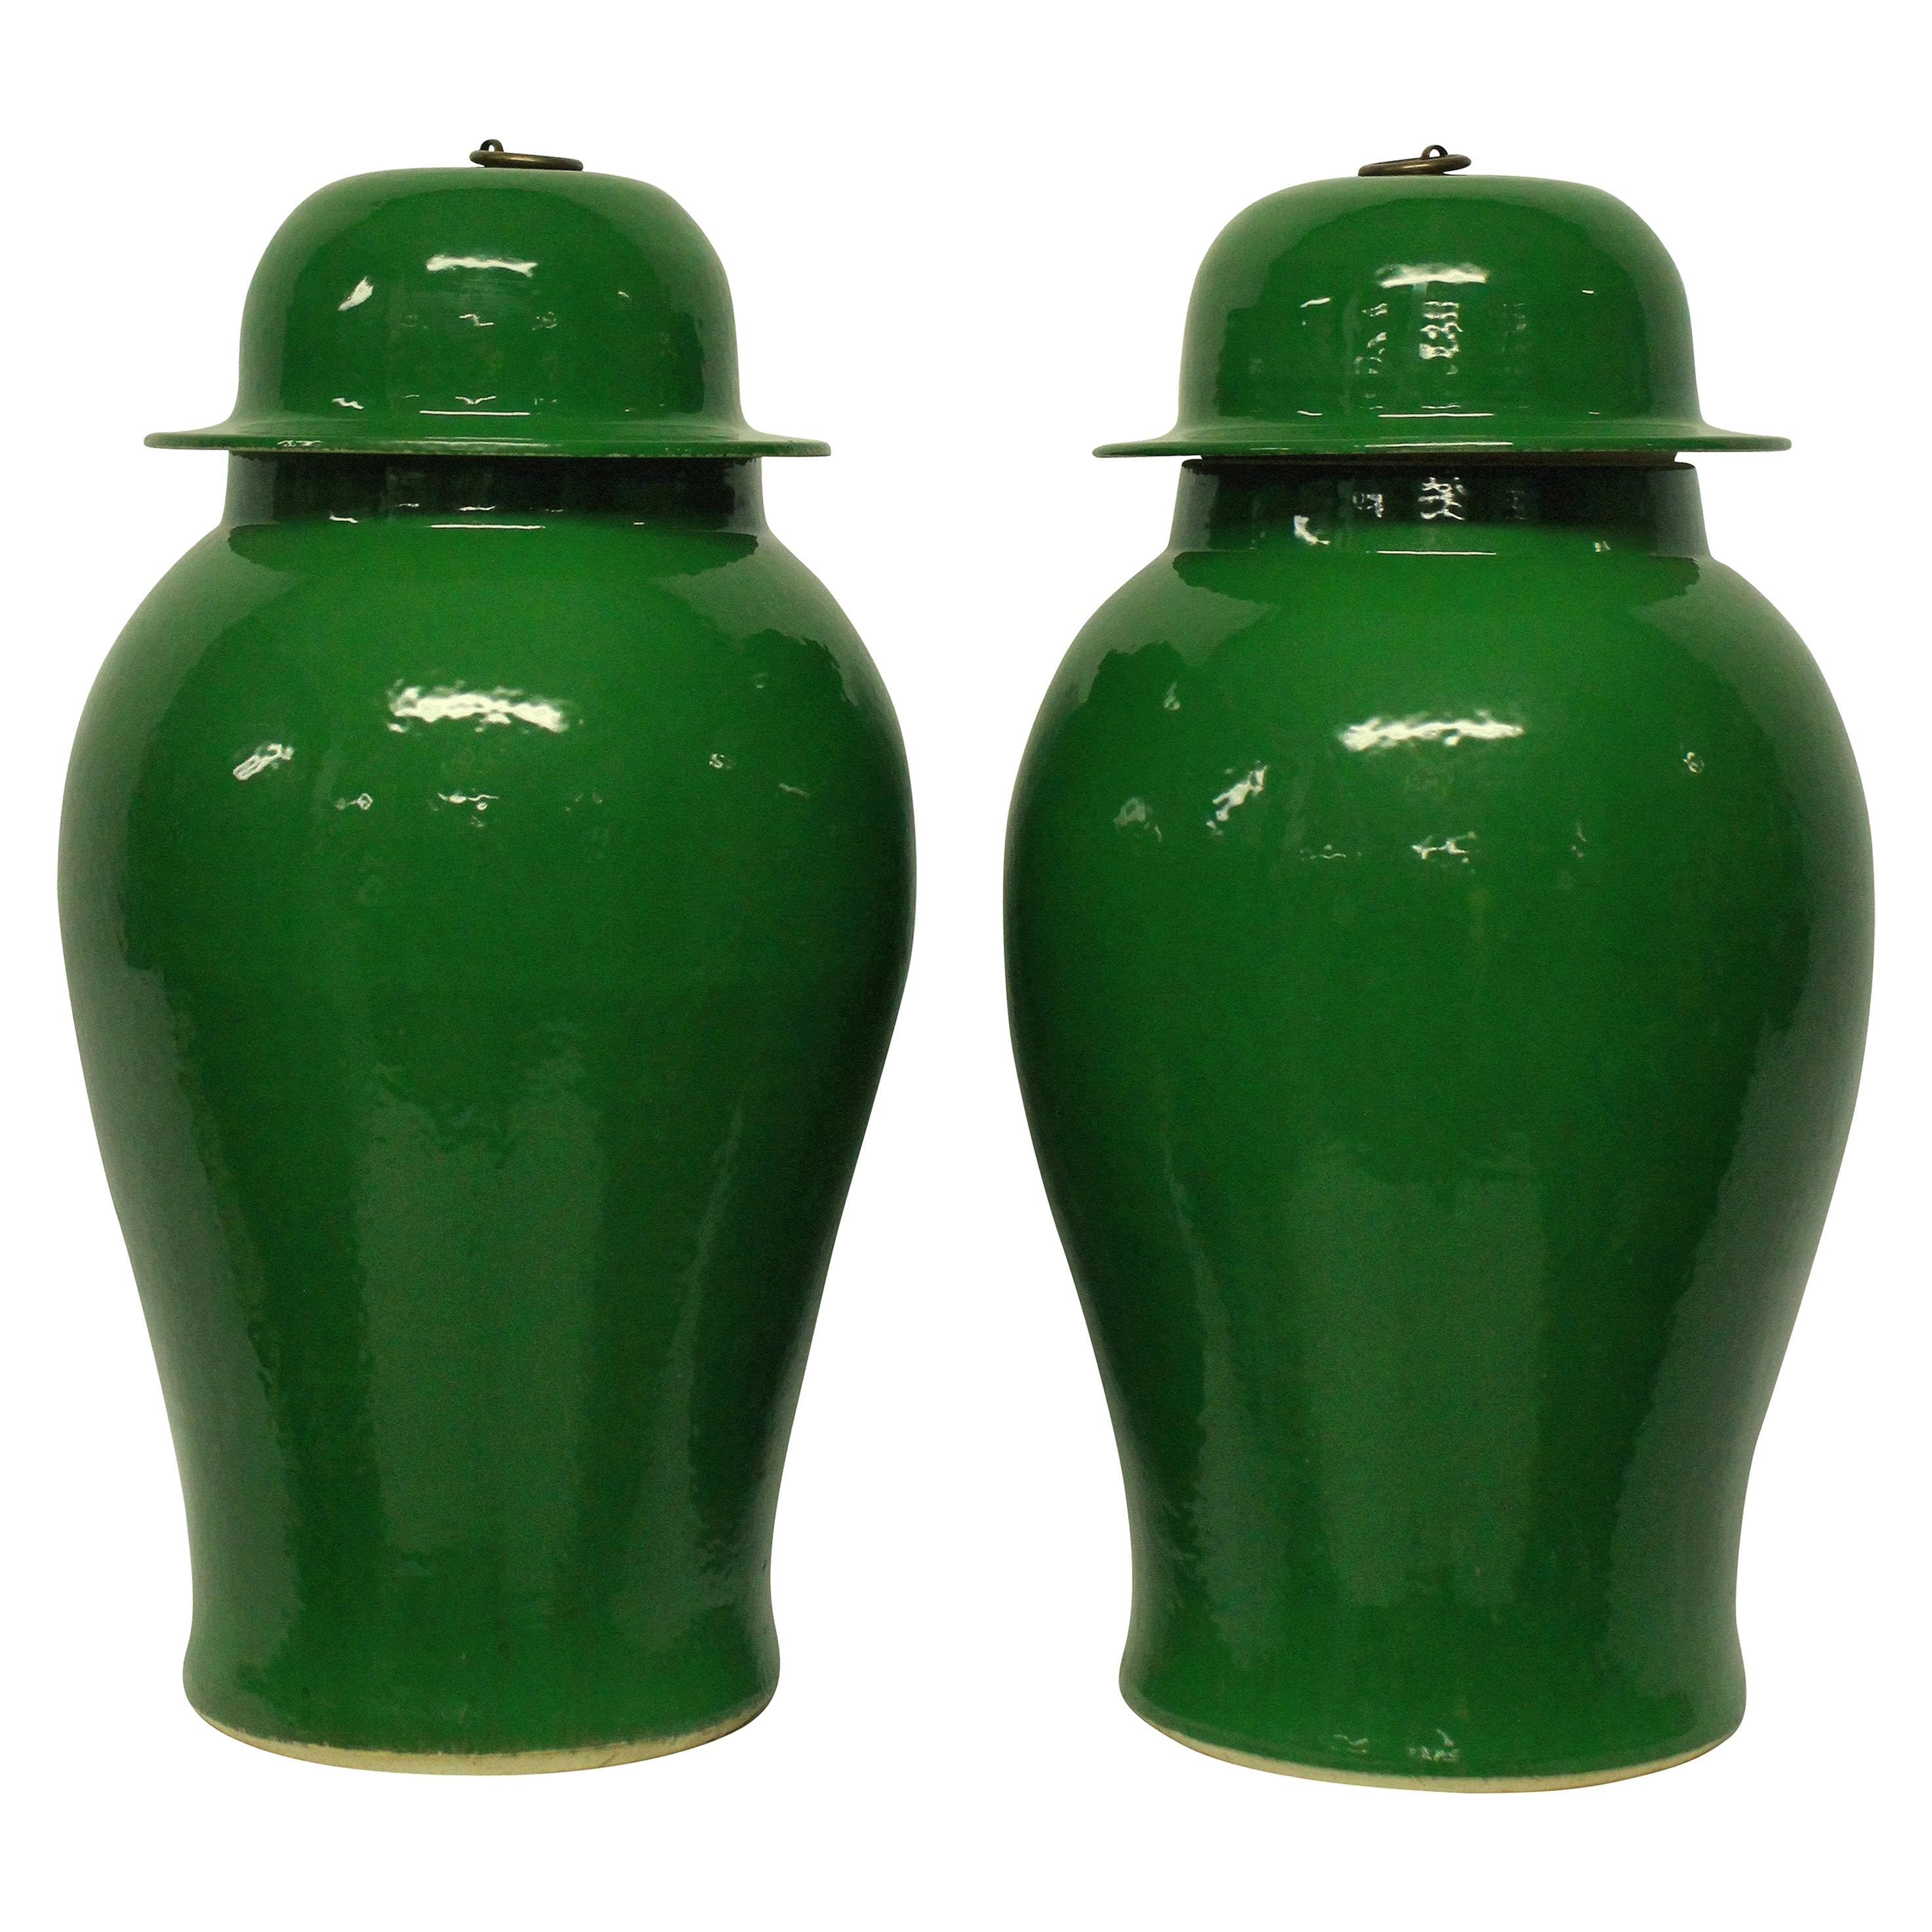 Pair of Large Emerald Green Chinese Glazed Vases